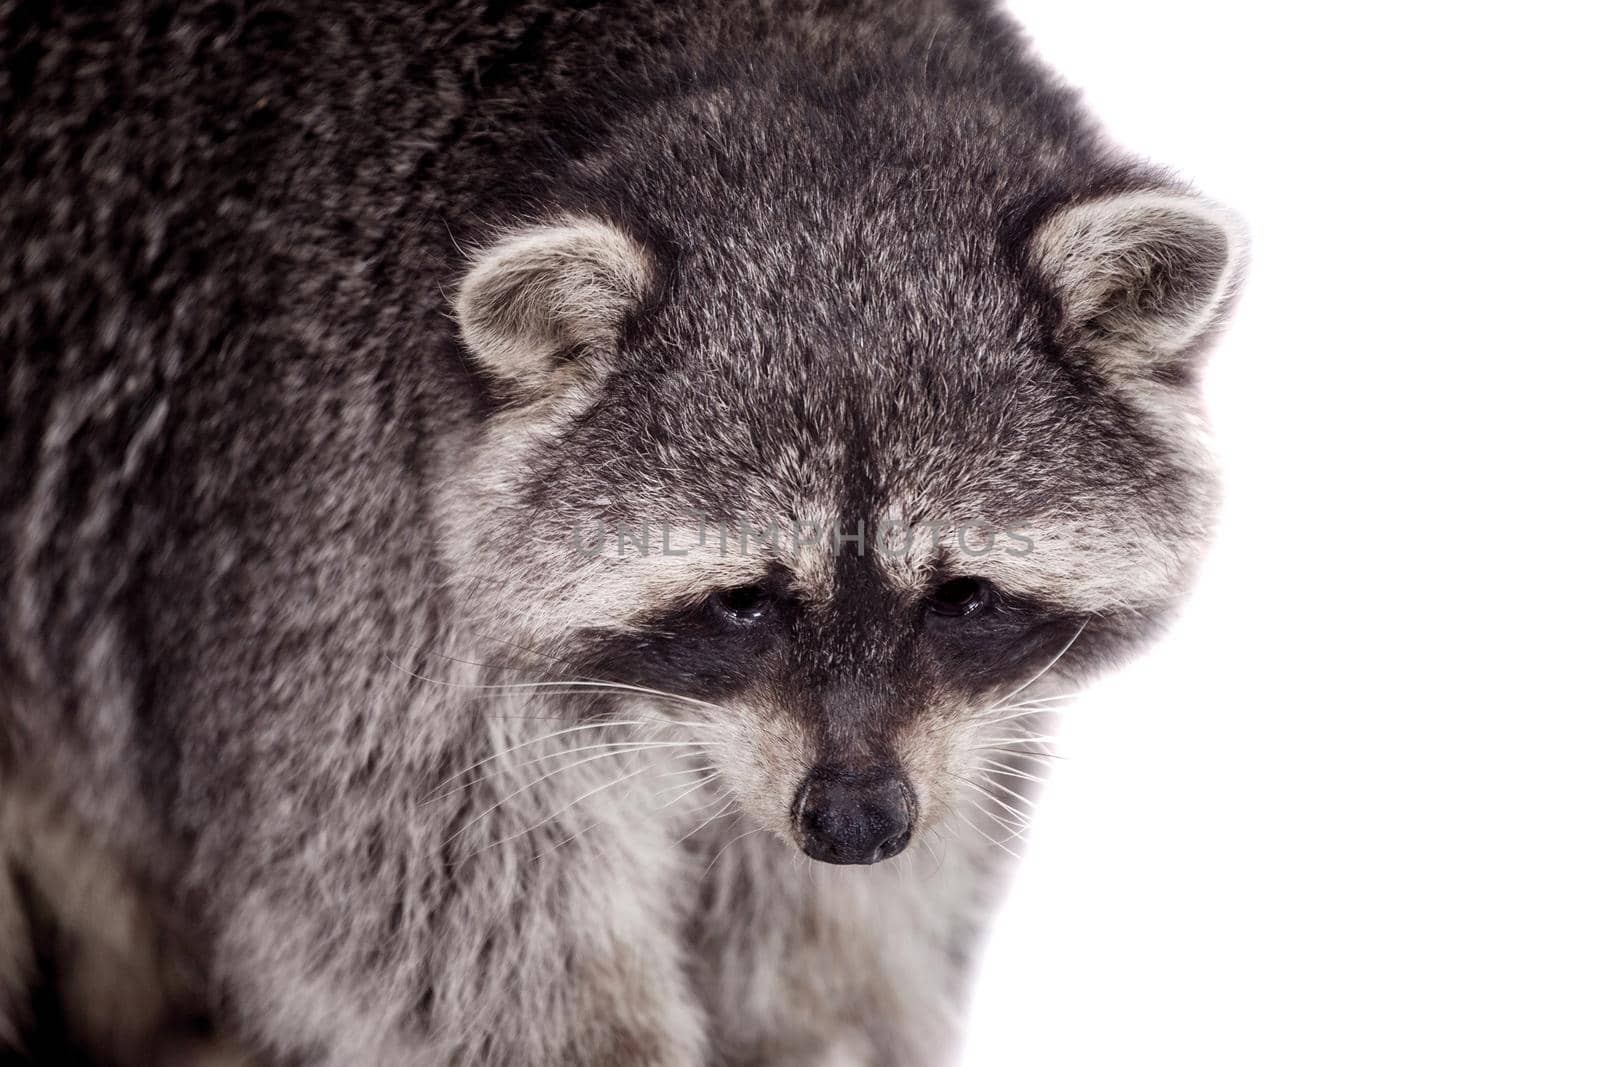 Raccoon, Procyon lotor, on the white background by RosaJay